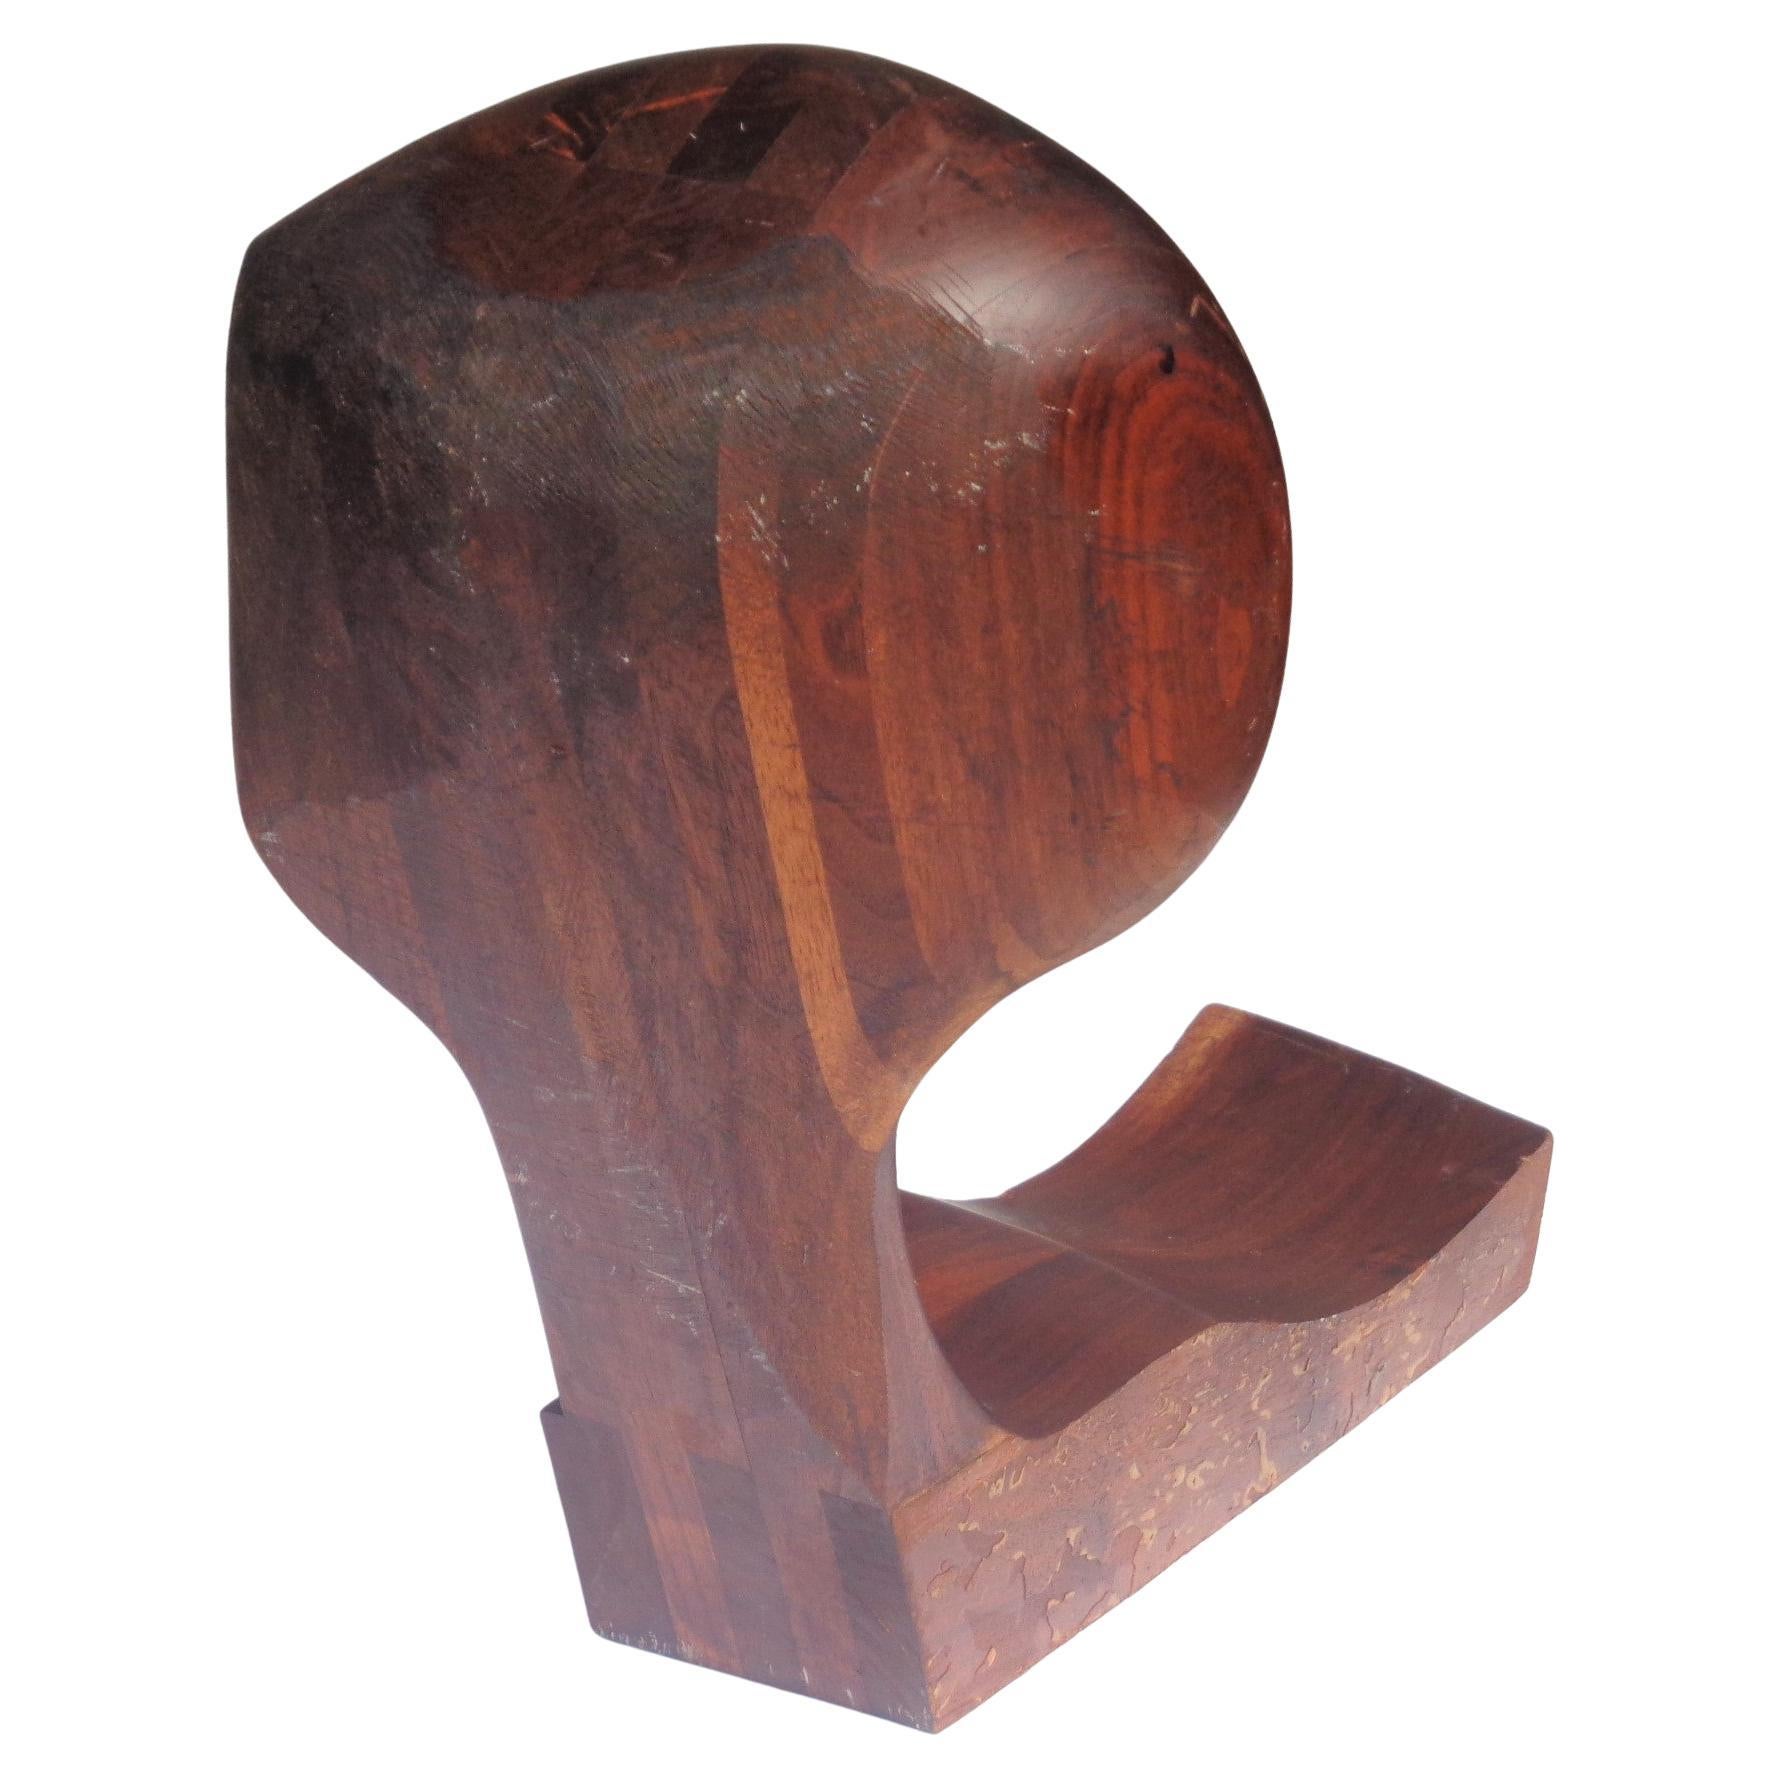 American Studio Craft Movement Abstract Sculpture Wood Bust, 1970-1980 For Sale 6